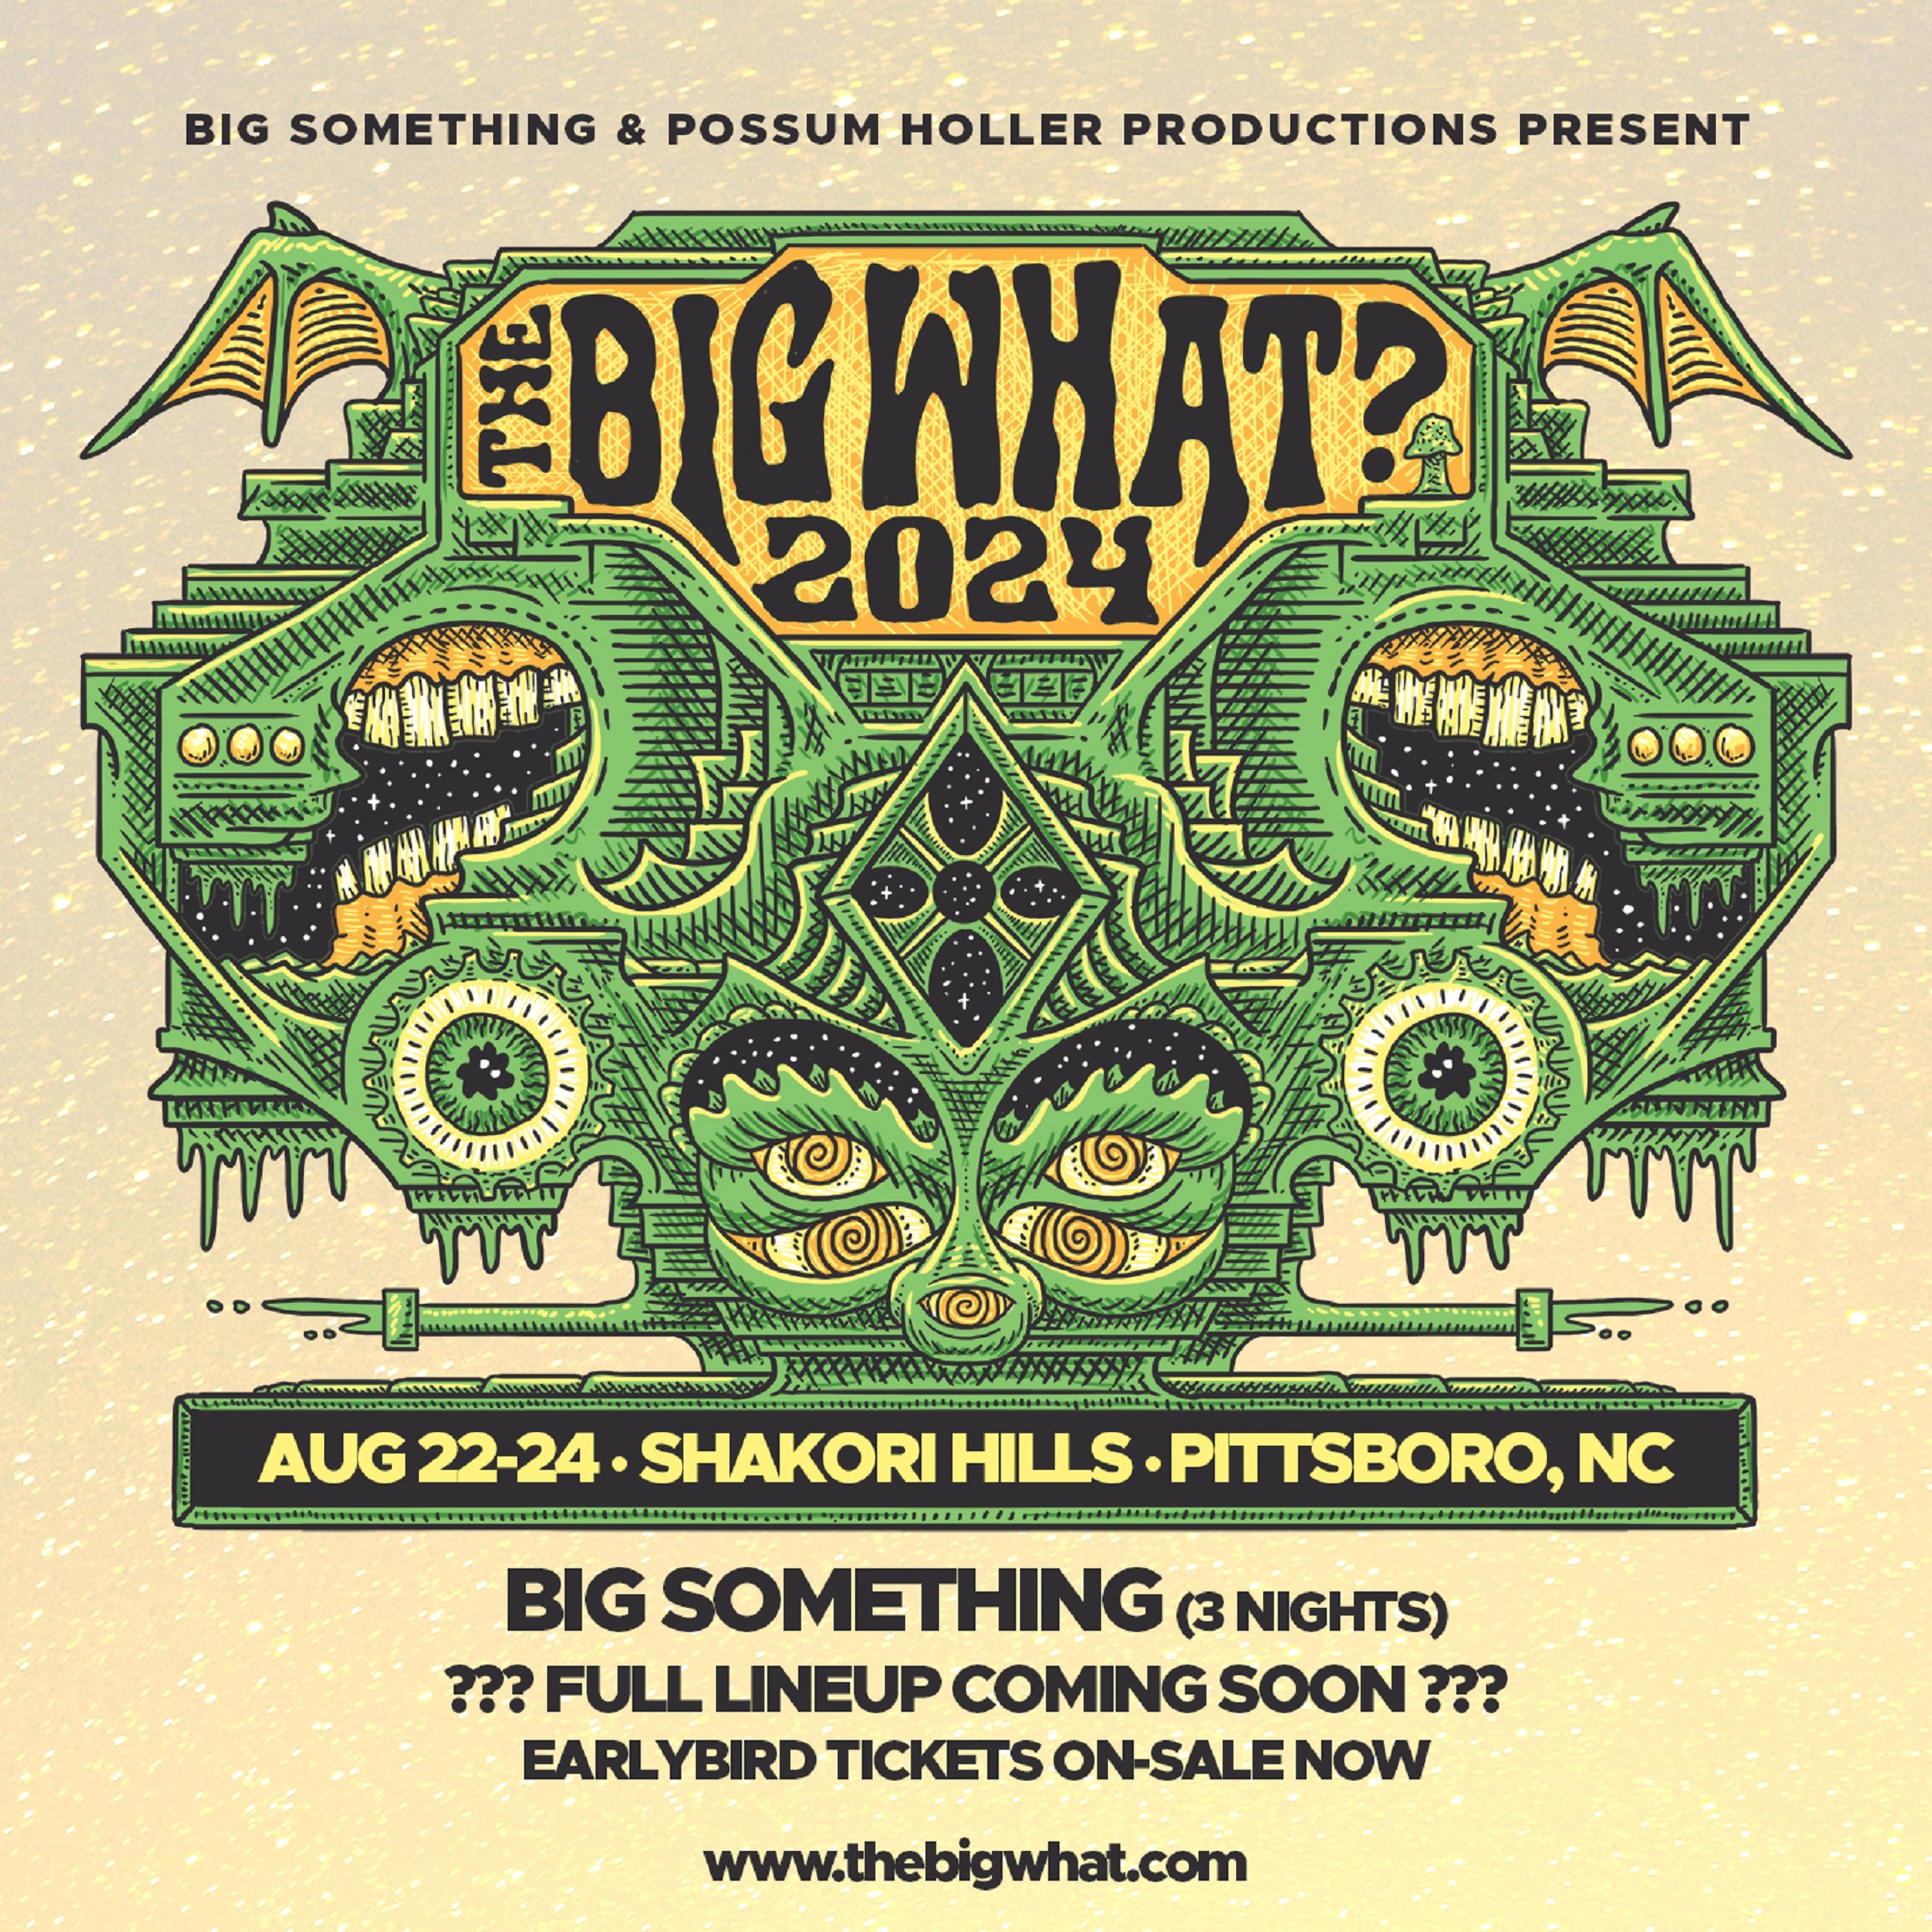 BIG SOMETHING ANNOUNCES THE RETURN OF THE BIG WHAT? MUSIC FESTIVAL